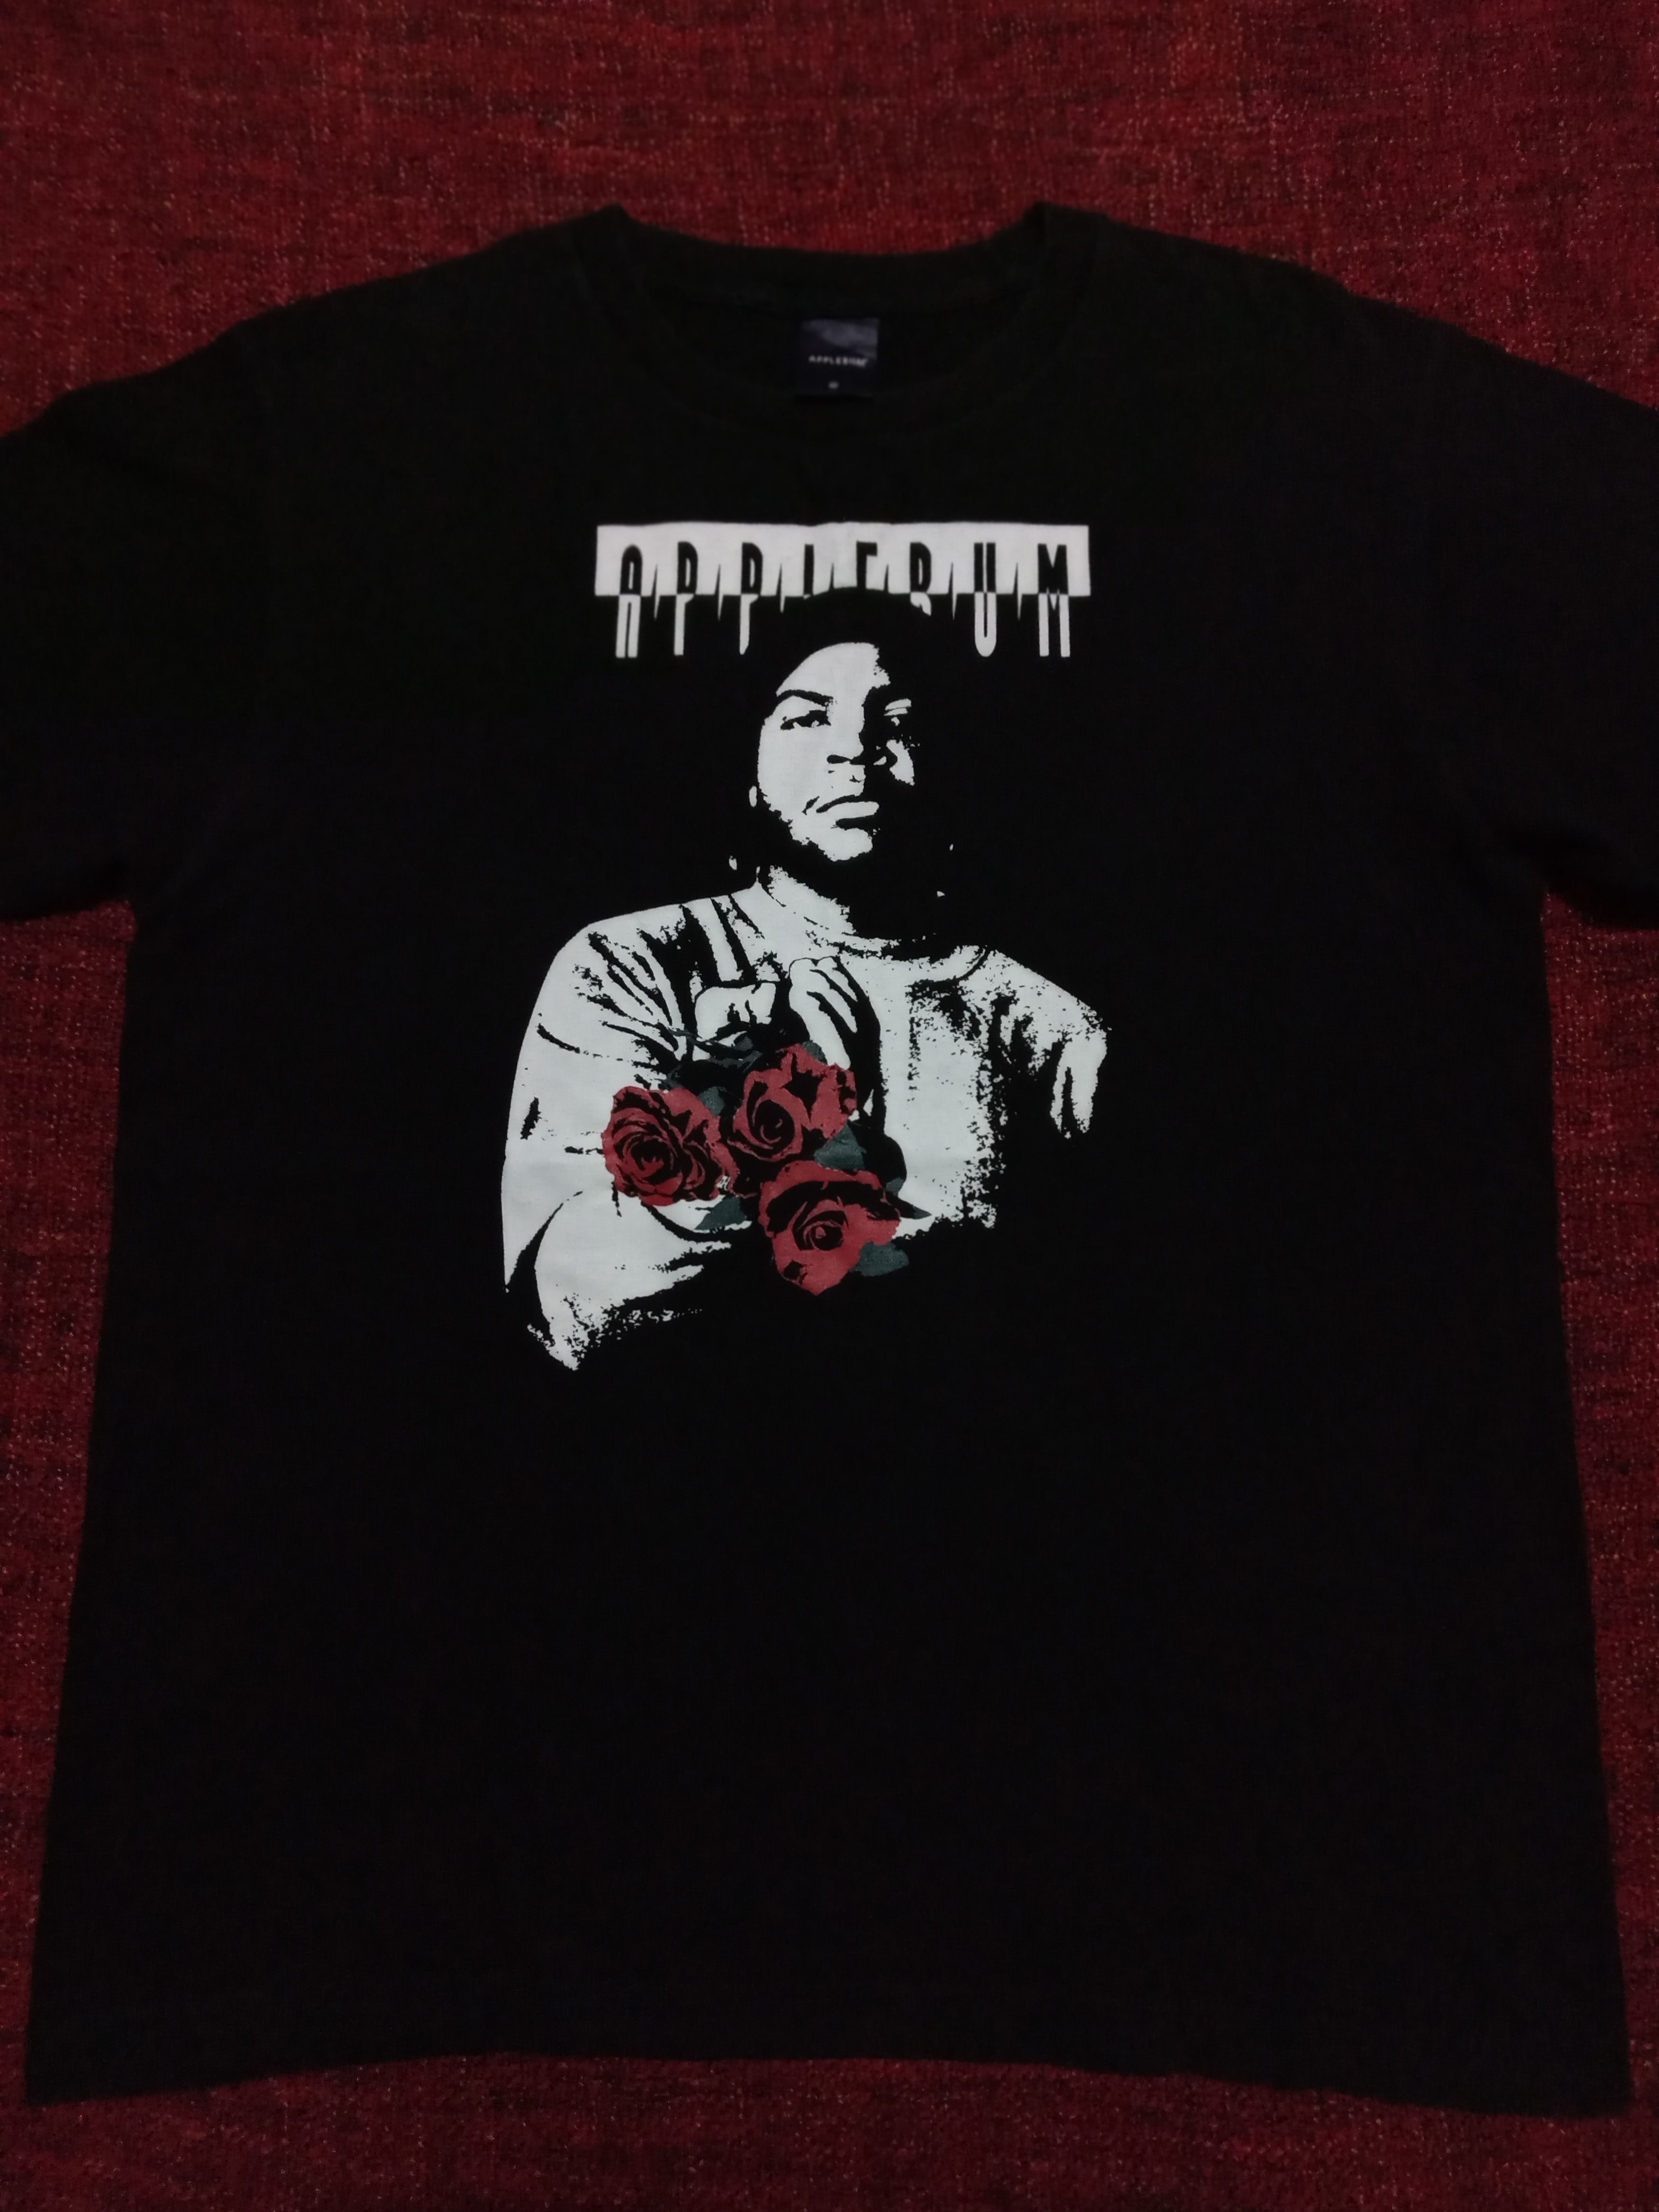 Japanese Brand Rare Applebum Japanese streetwear tribute to Ice cube Tee Size US M / EU 48-50 / 2 - 6 Preview